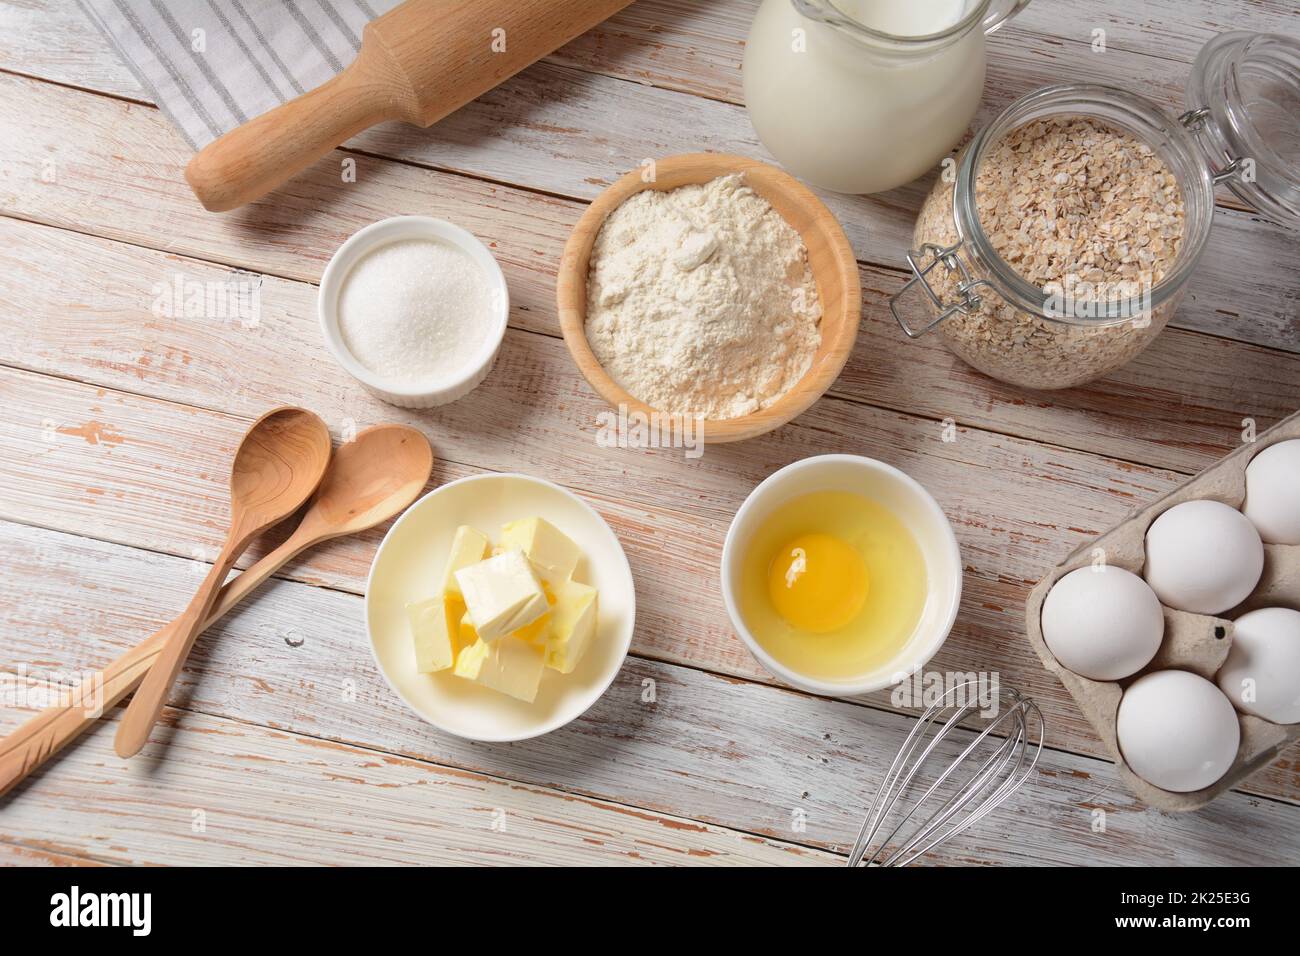 https://c8.alamy.com/comp/2K25E3G/frame-of-food-ingredients-for-baking-on-a-white-background-flour-eggs-sugar-and-milk-in-white-and-wooden-bowls-cooking-and-baking-concept-2K25E3G.jpg